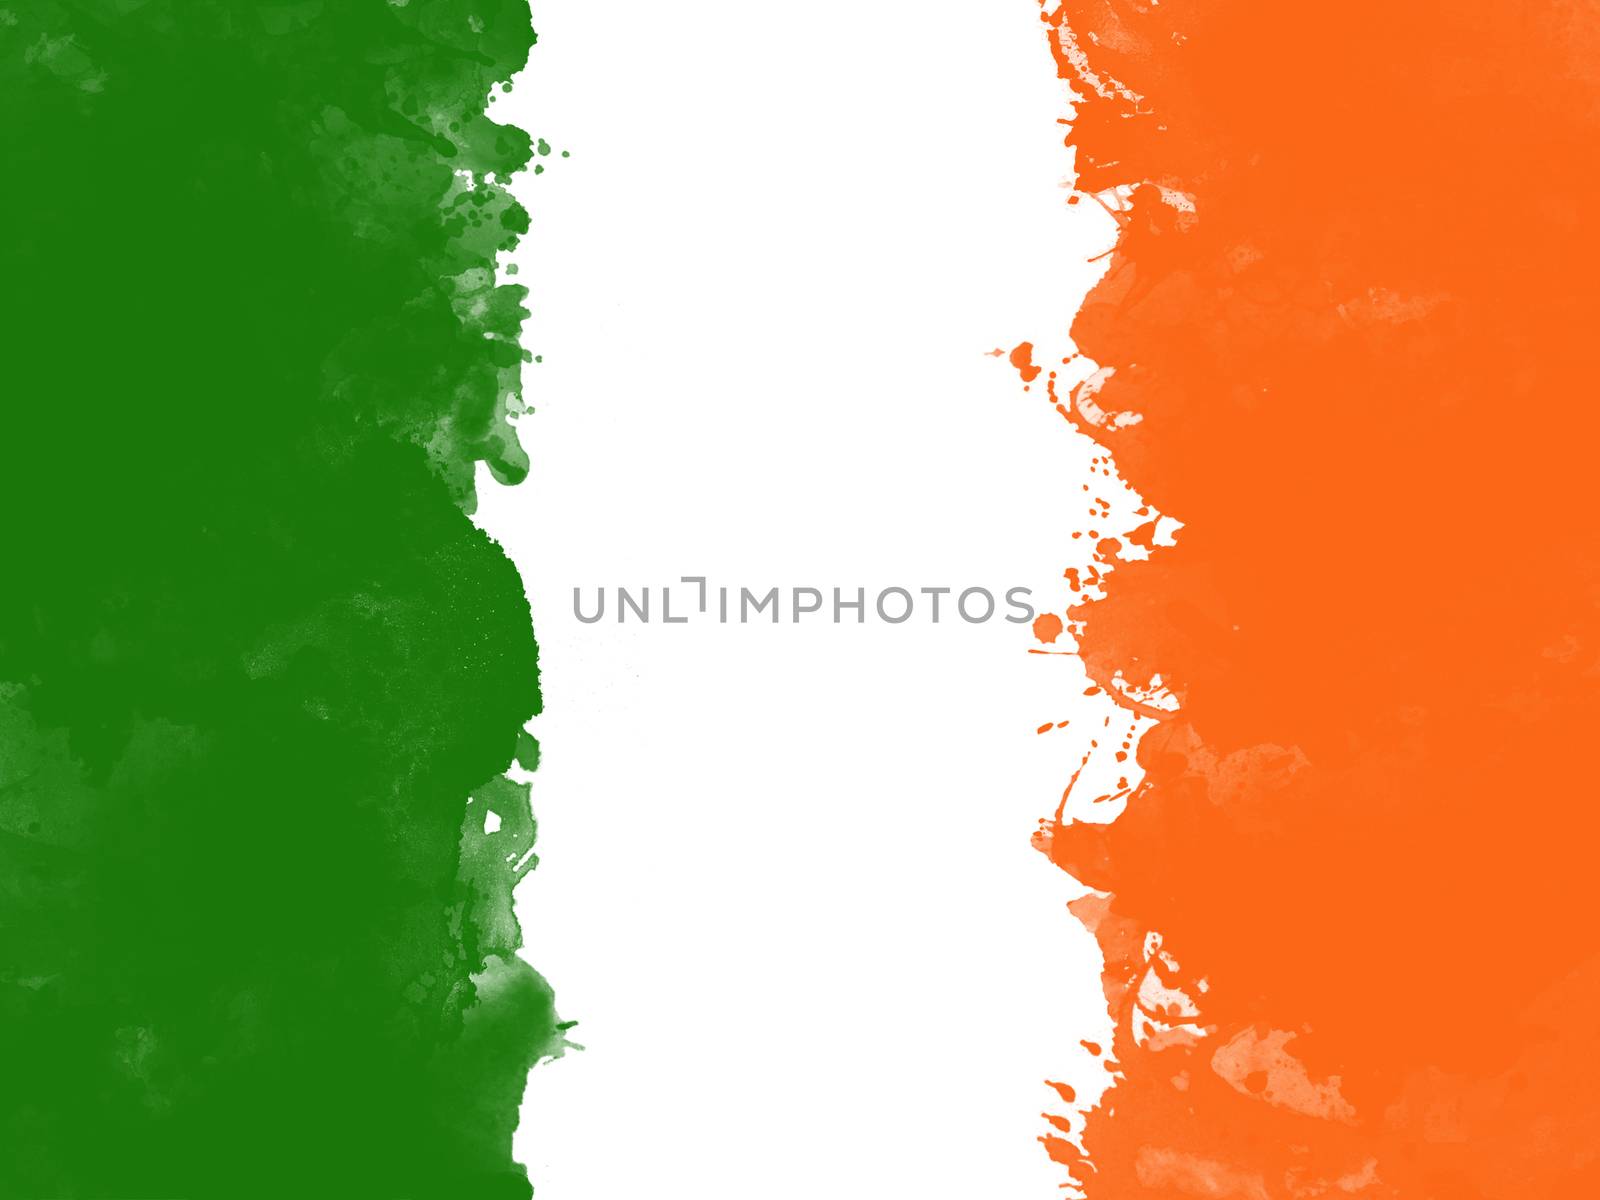 Flag of Ireland by watercolor paint brush, grunge style by asiandelight